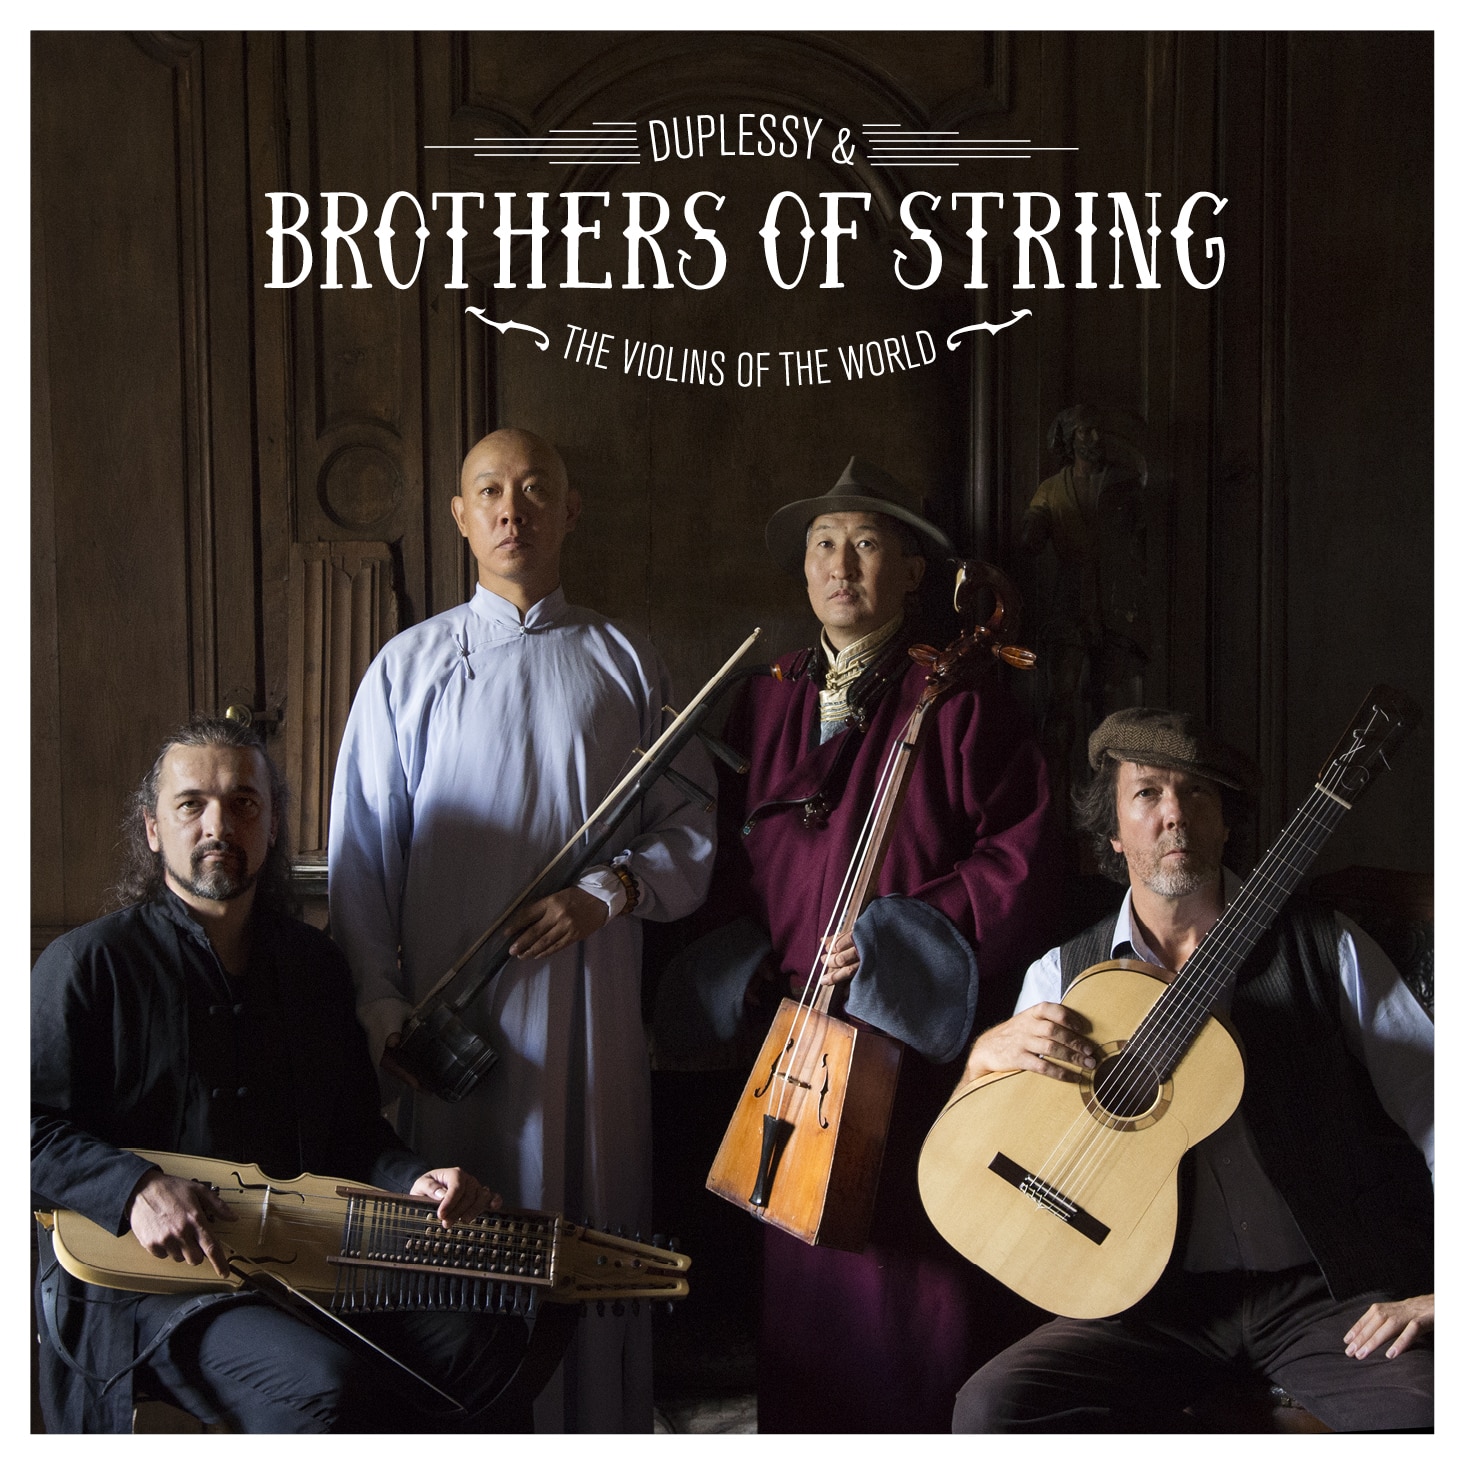 DUPLESSY & BROTHERS OF STRING